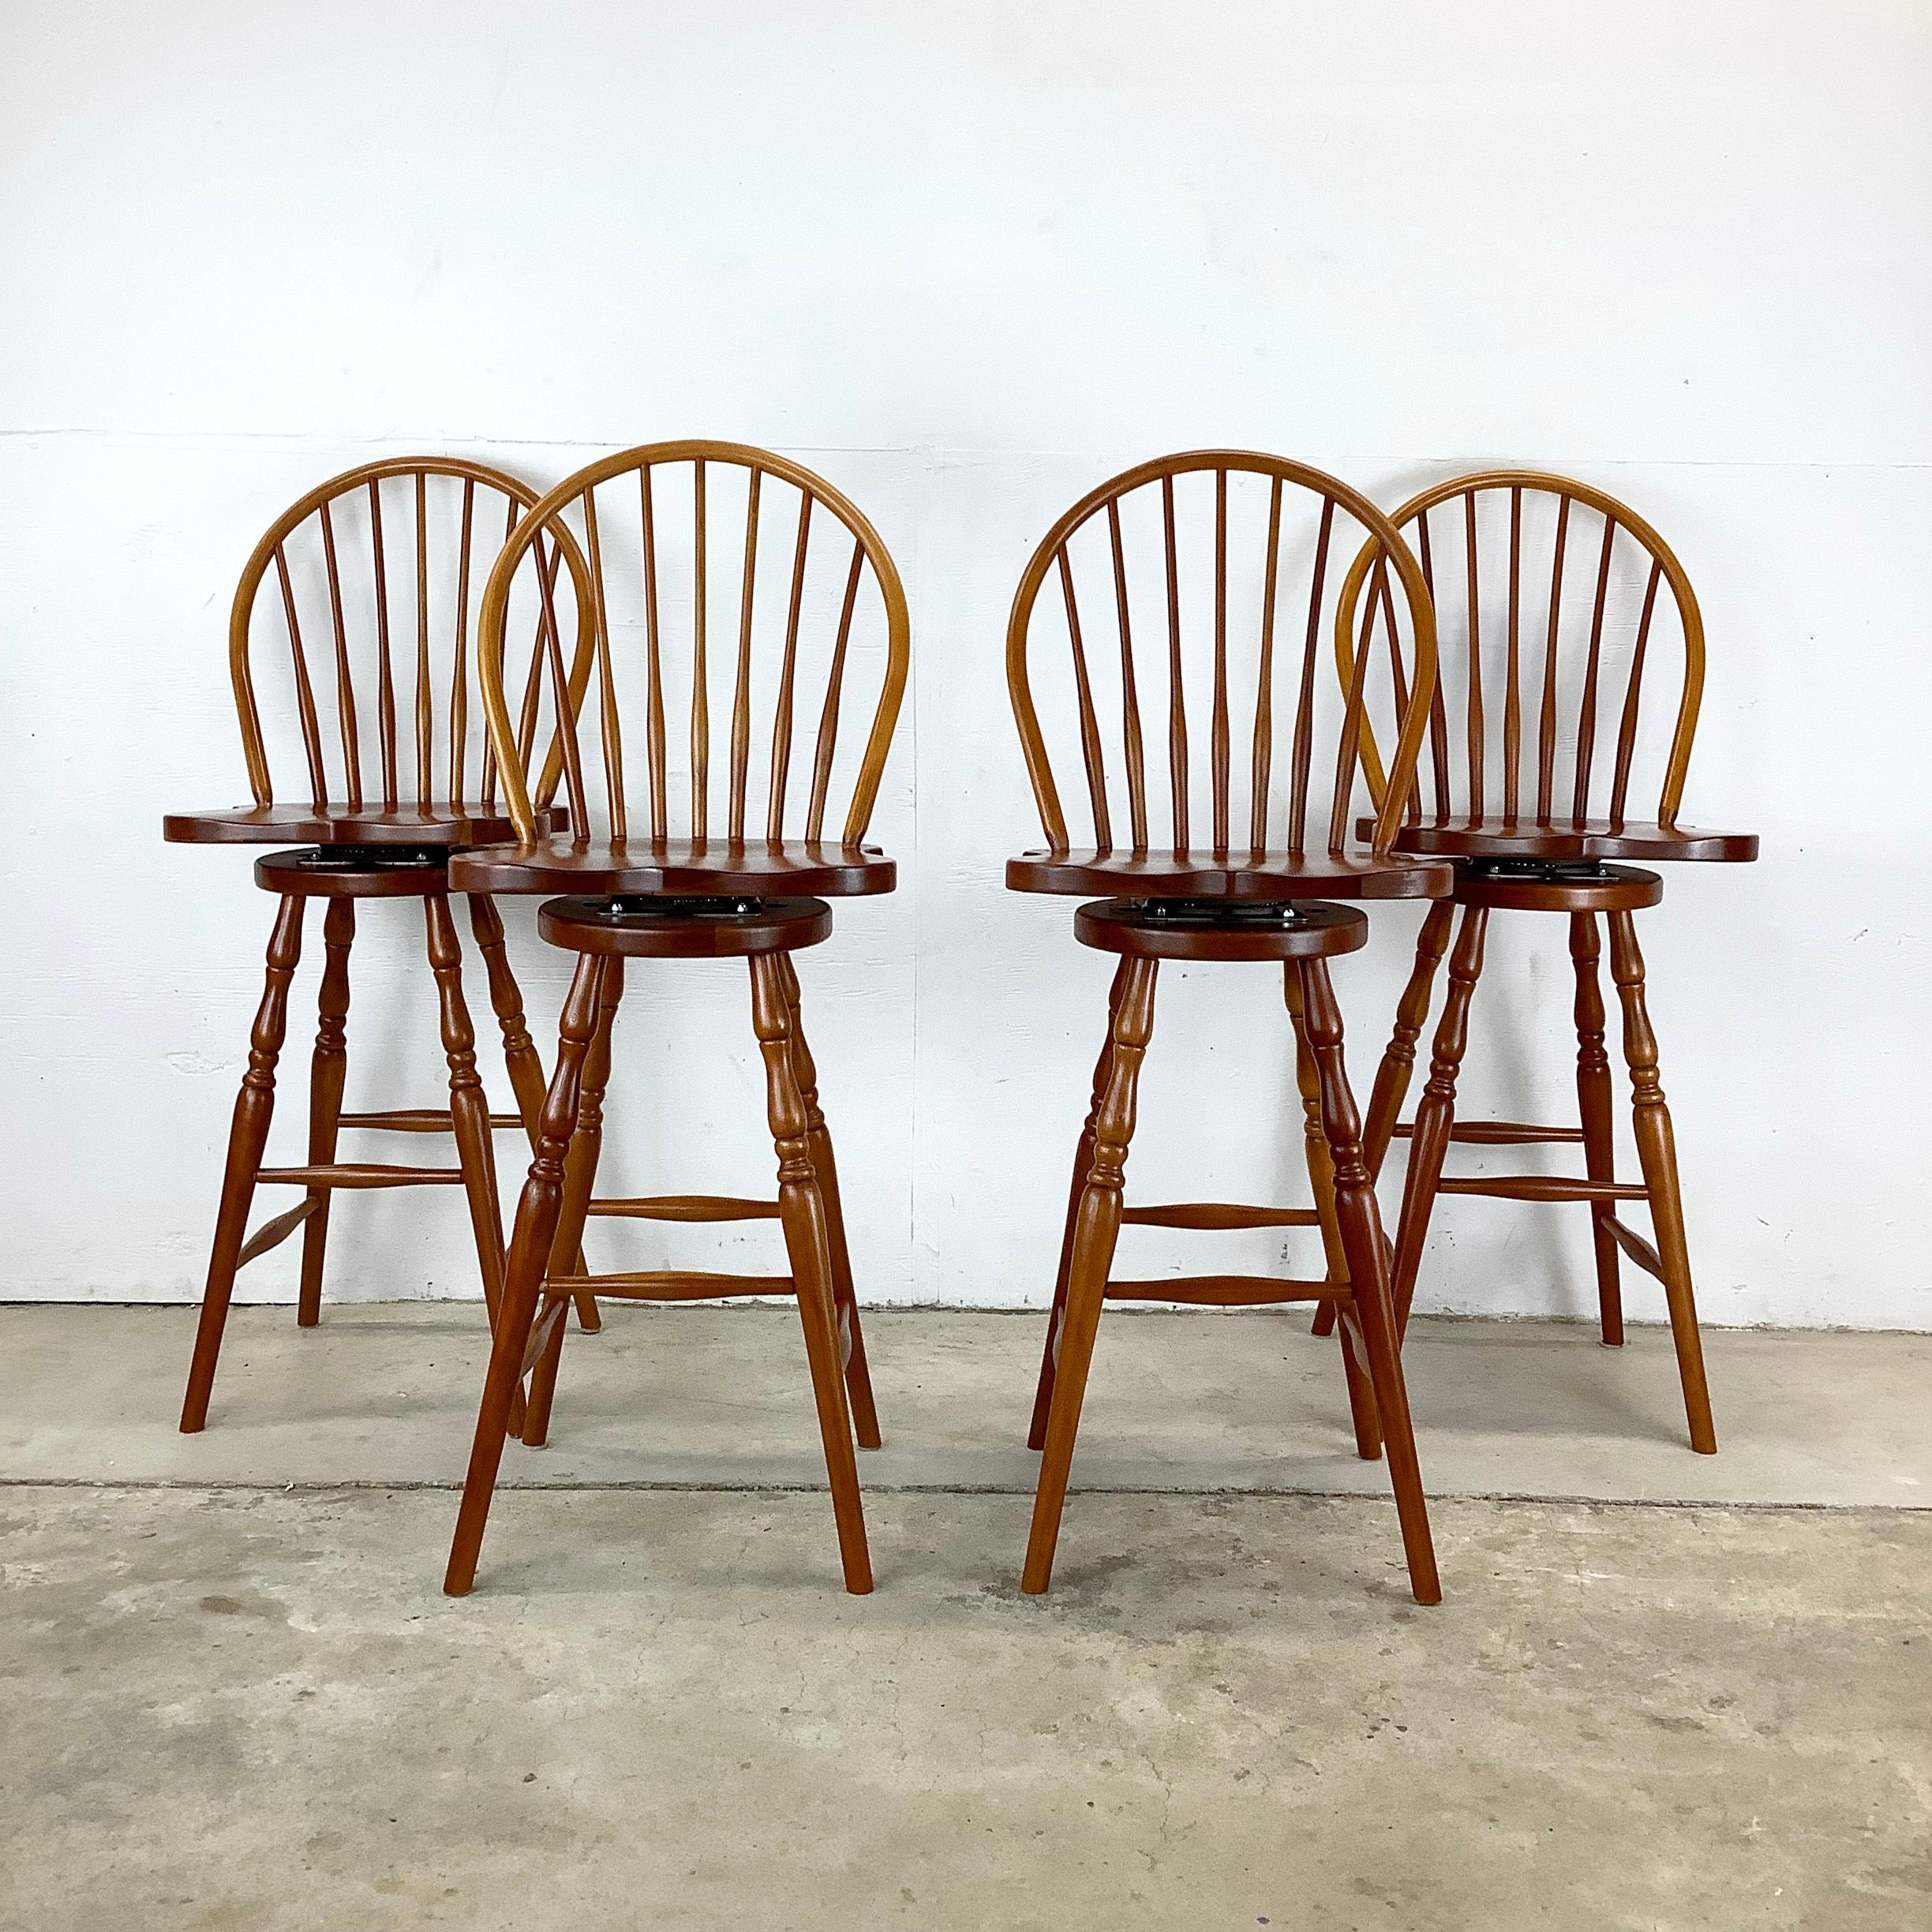 Step into the world of bespoke craftsmanship with these Windsor cherry bar stools from Tom Seely furniture, a name synonymous with quality woodworking. Each stool, carefully hewn from rich cherry wood, offers not only a seat but a touch of refined